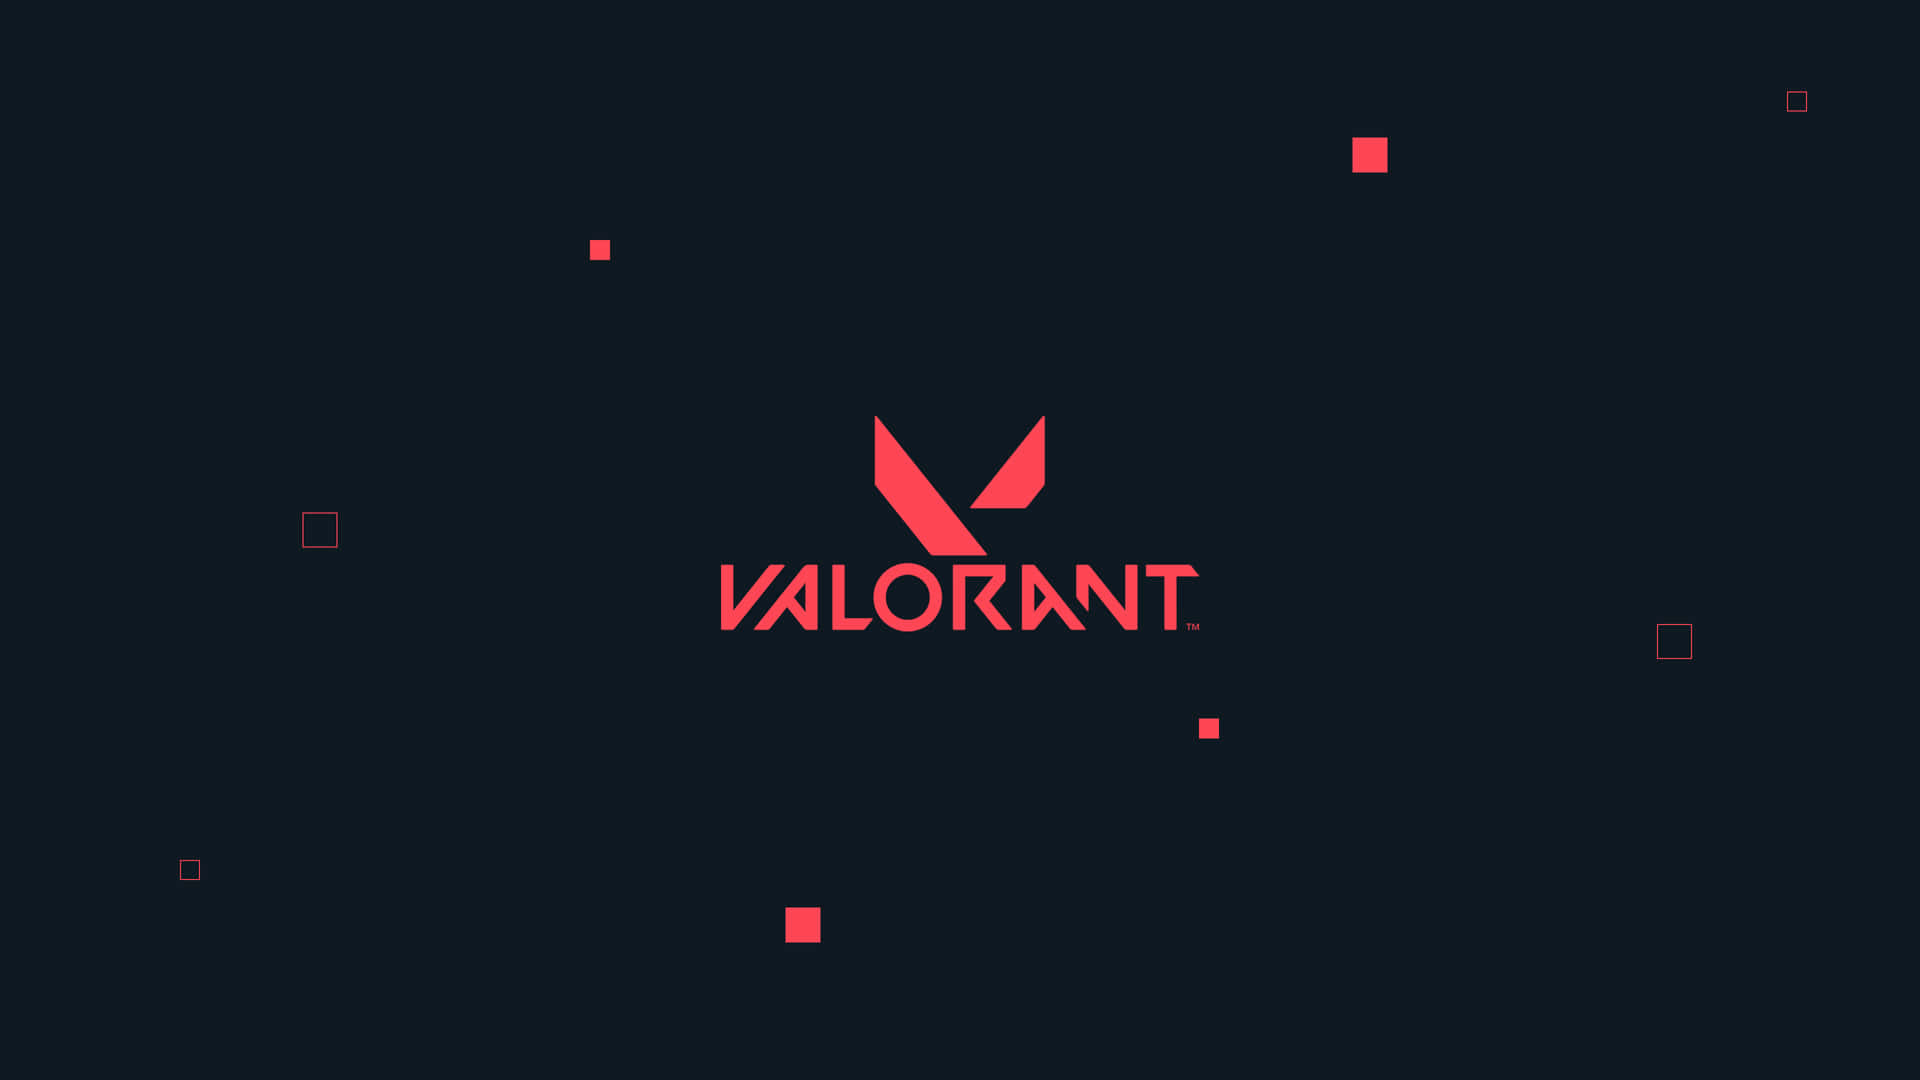 Epic Valorant Desktop Wallpaper featuring characters in action Wallpaper